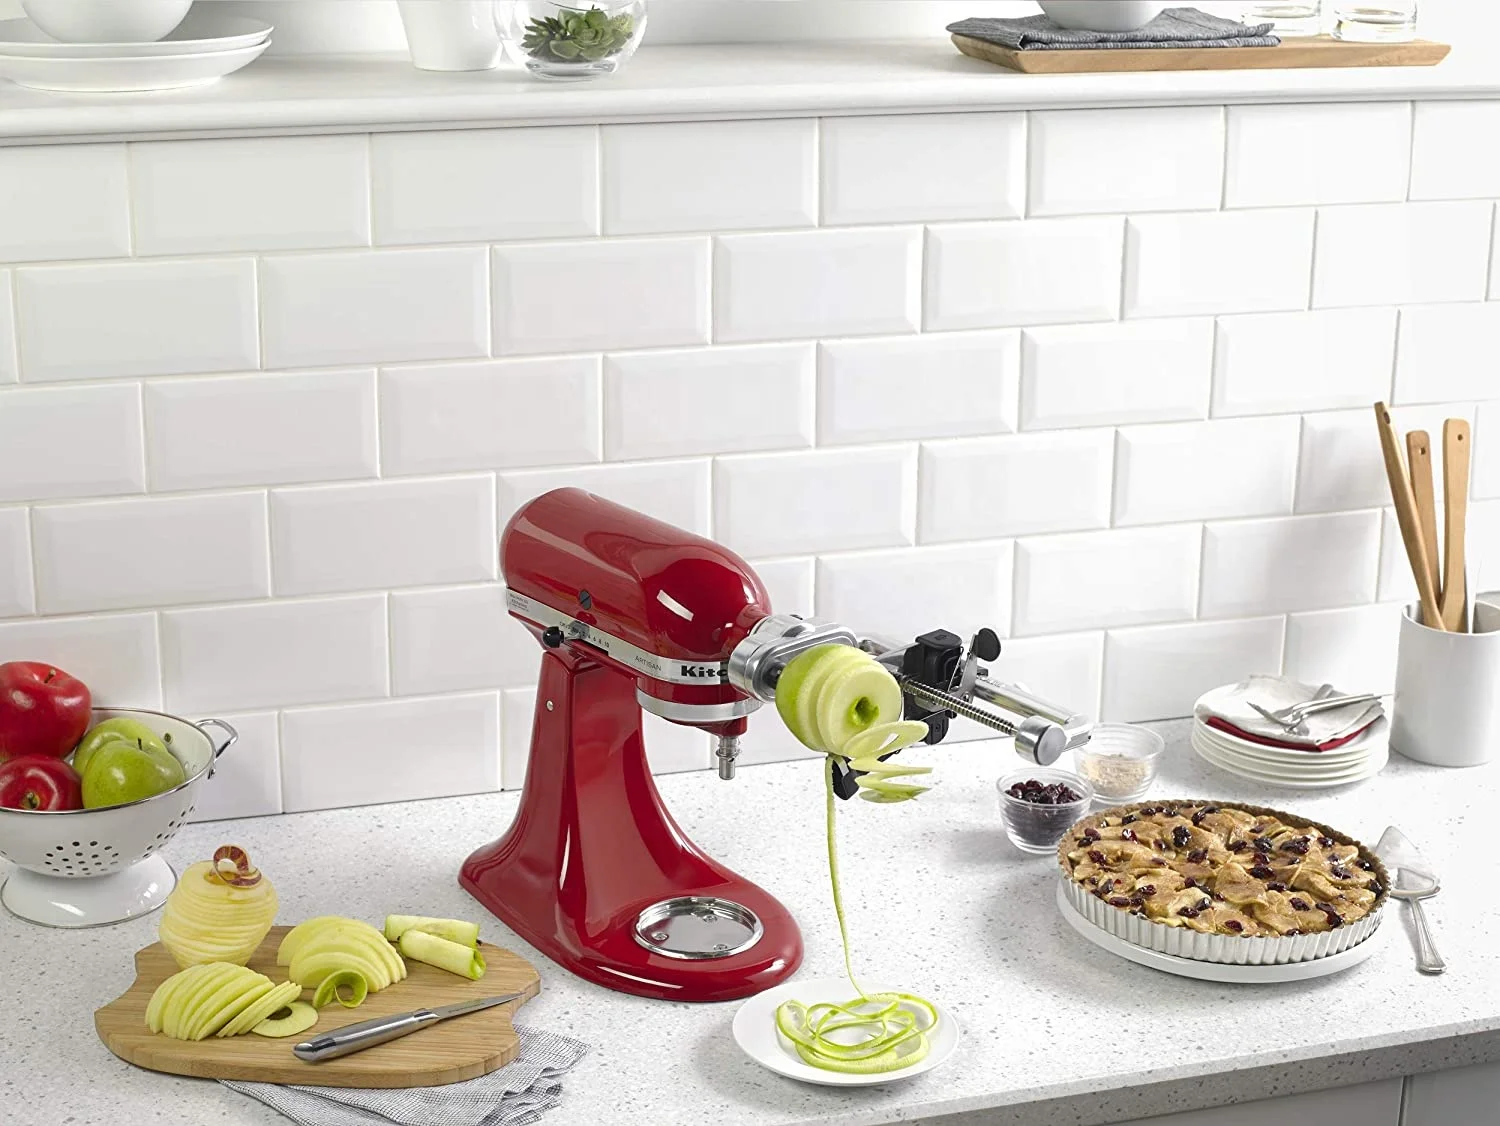 
KitchenAid Stand Mixers with 5 blades 